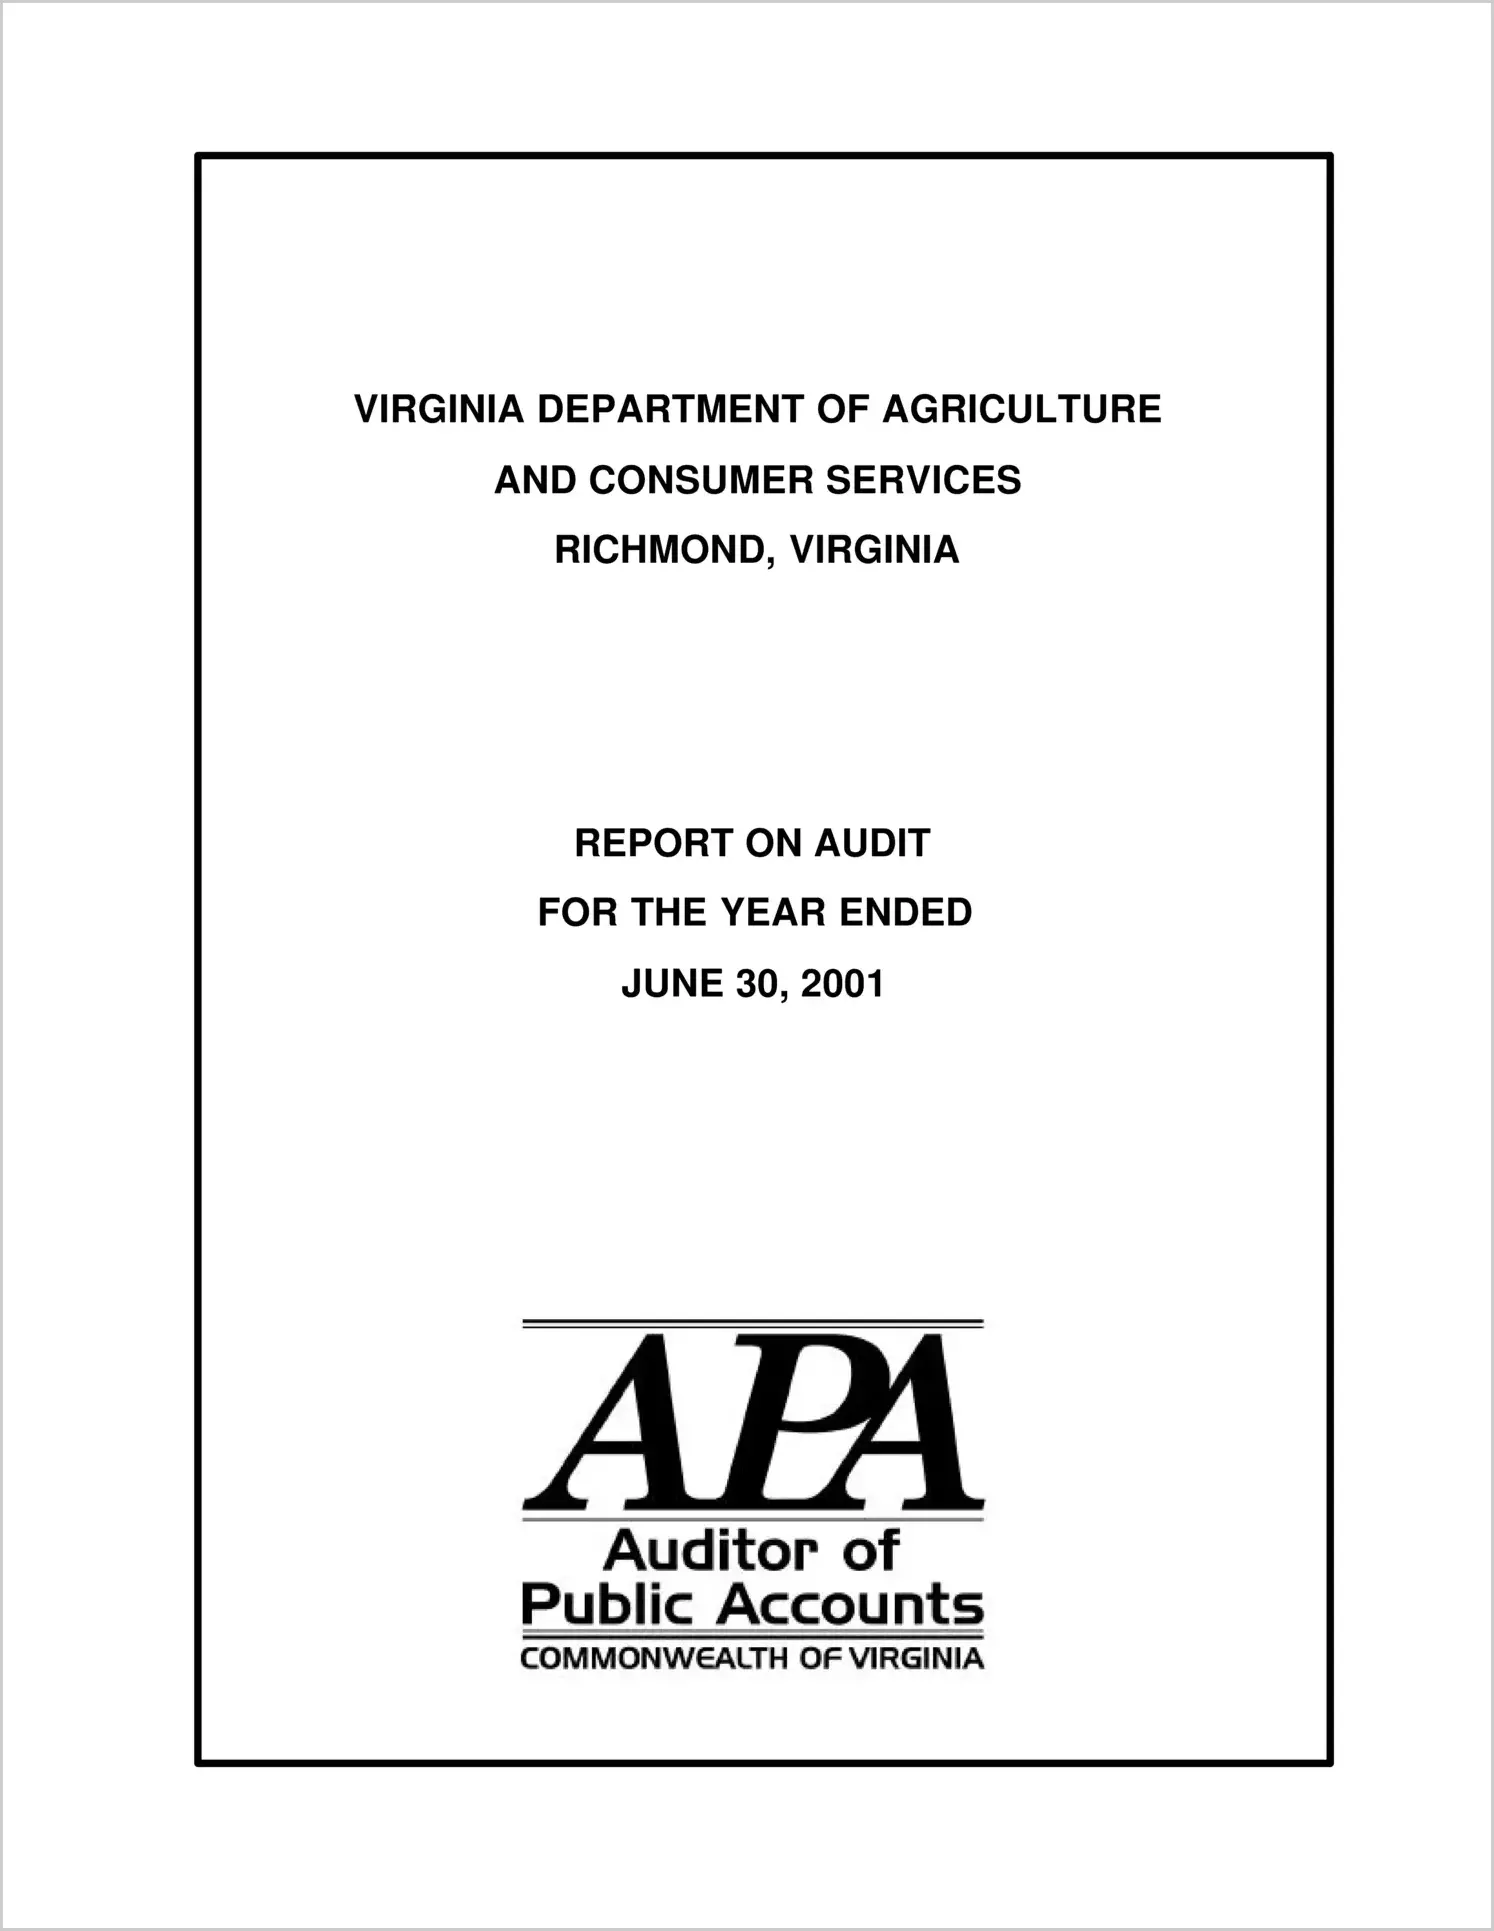 Department of Agriculture and Consumer Services for the year ended June 30, 2001